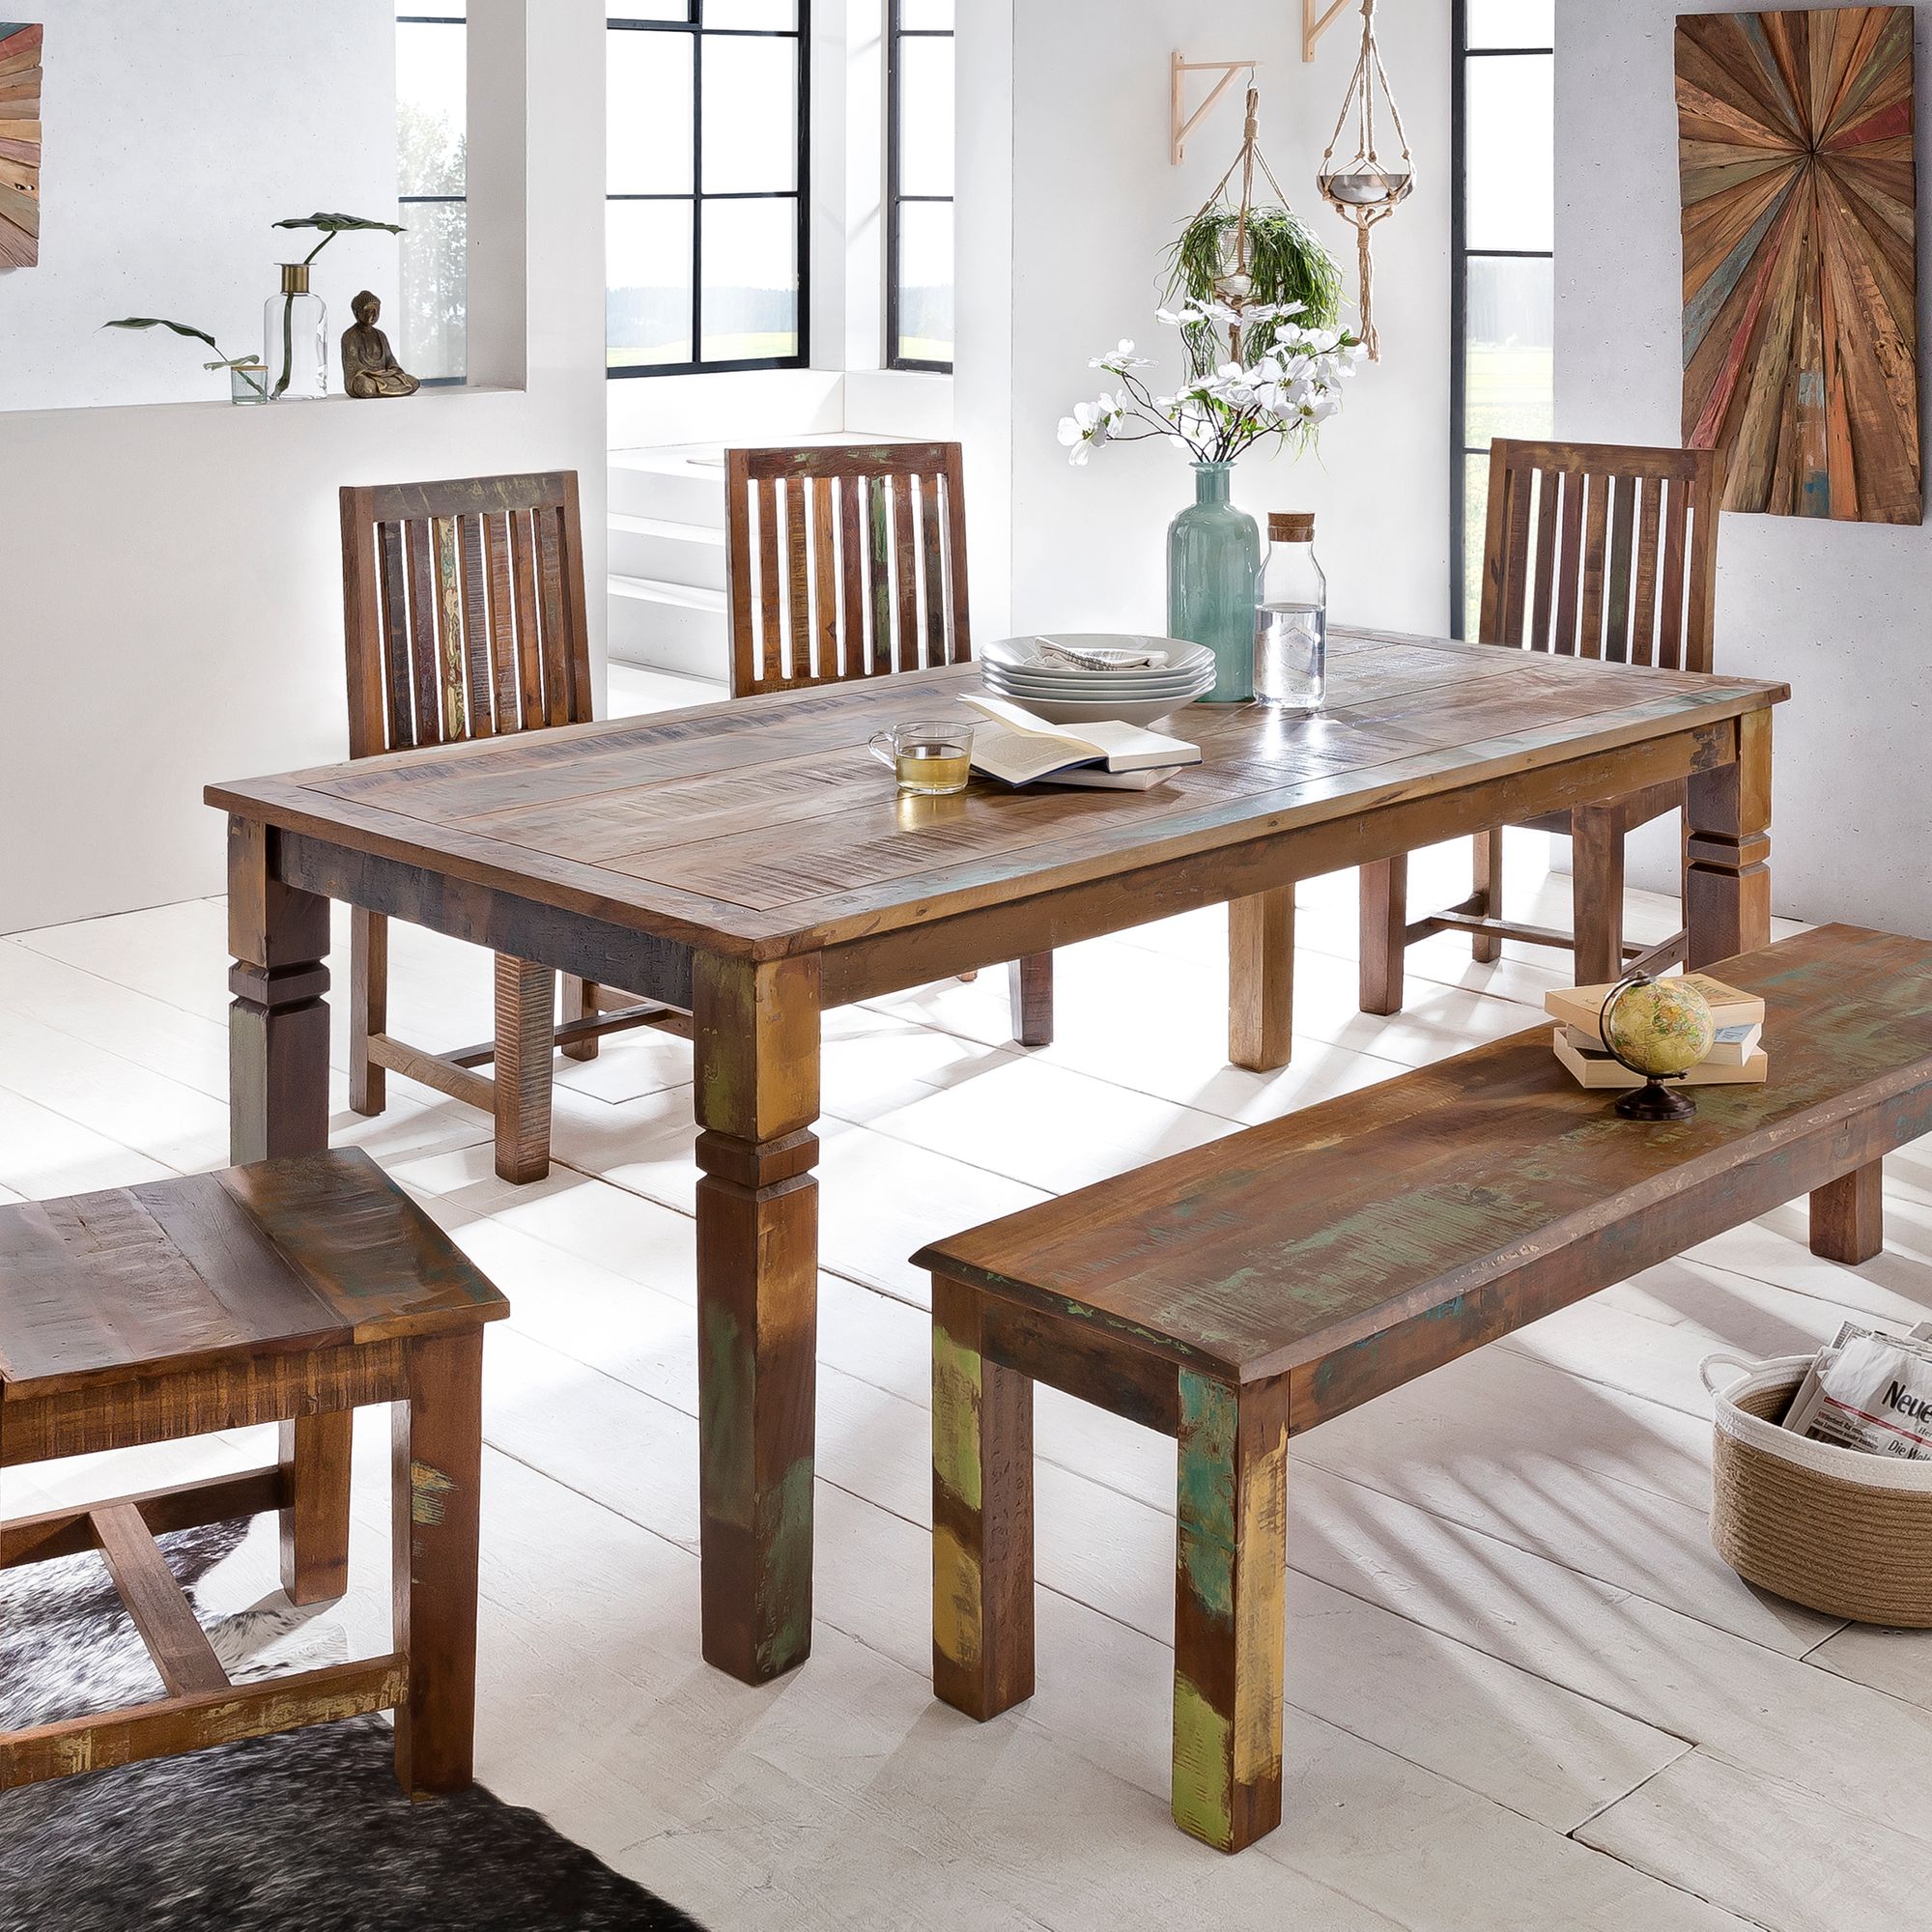 Nancy's Maumee Dining Table - Dining Room Table - Kitchen Table - 6-8 Persons - Brown - Recycled Mango Wood - 180 x 90 x 76 cm